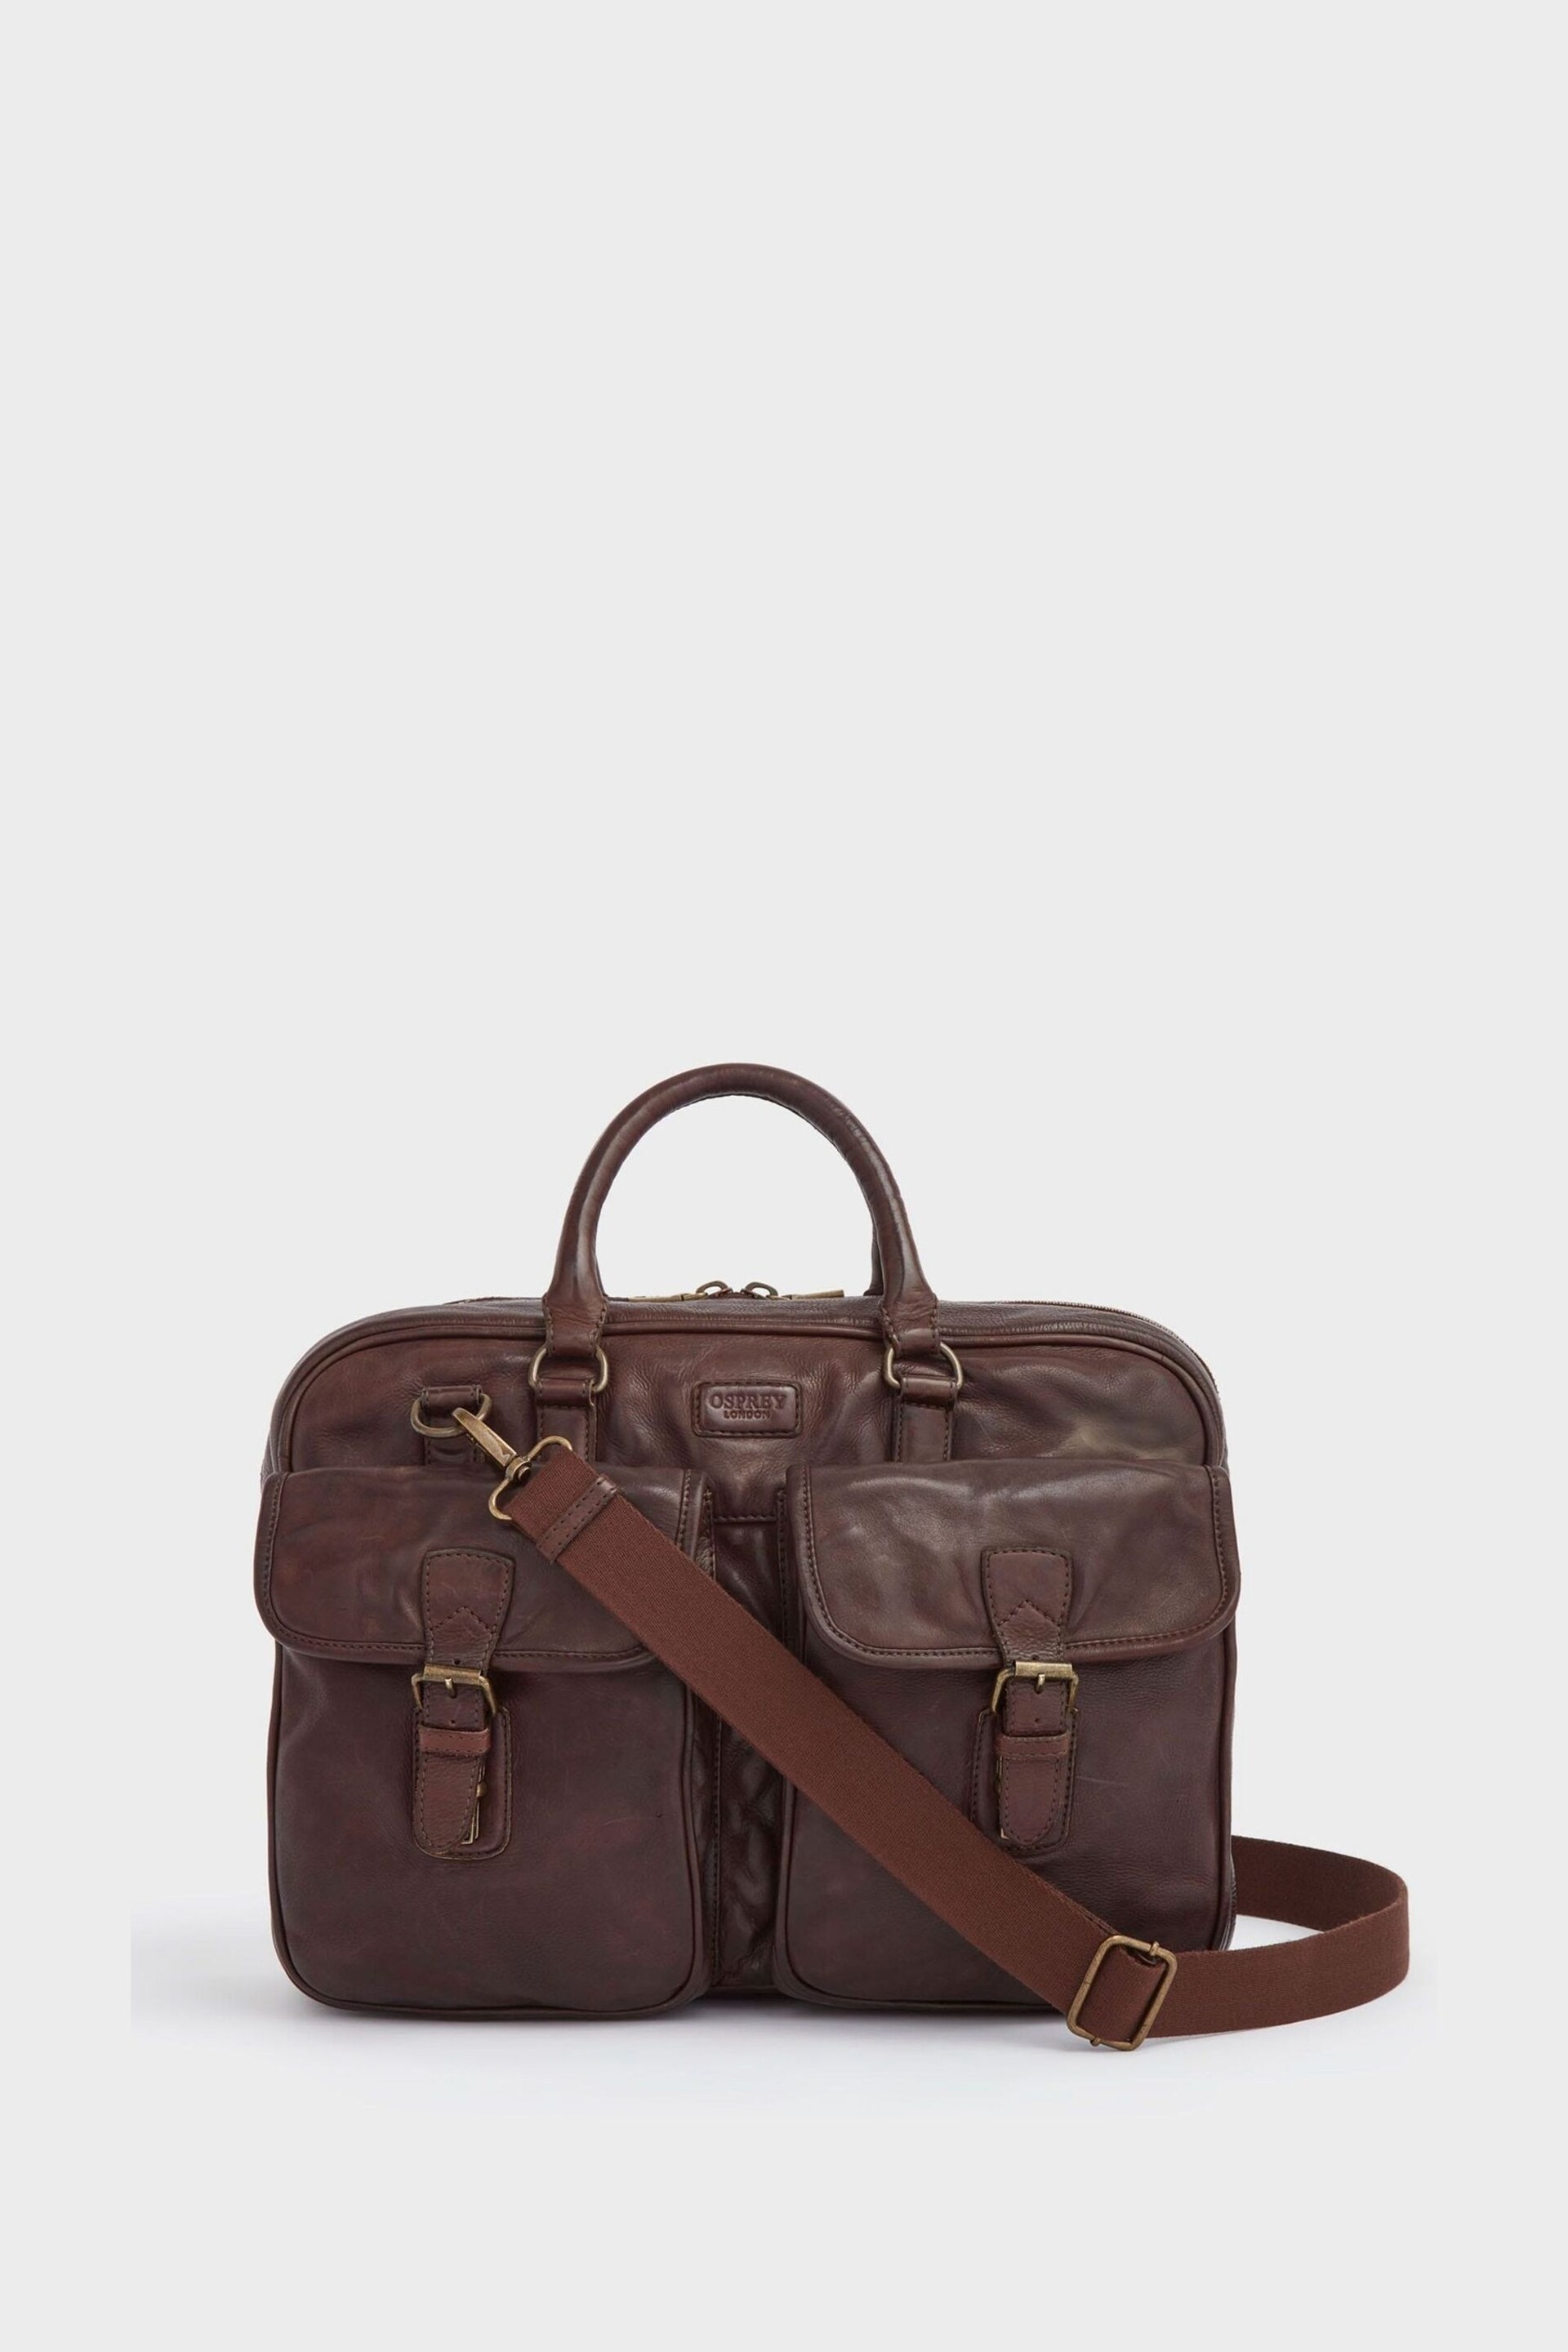 Osprey London Medium The Washed Leather Grip Brown Bag - Image 1 of 7